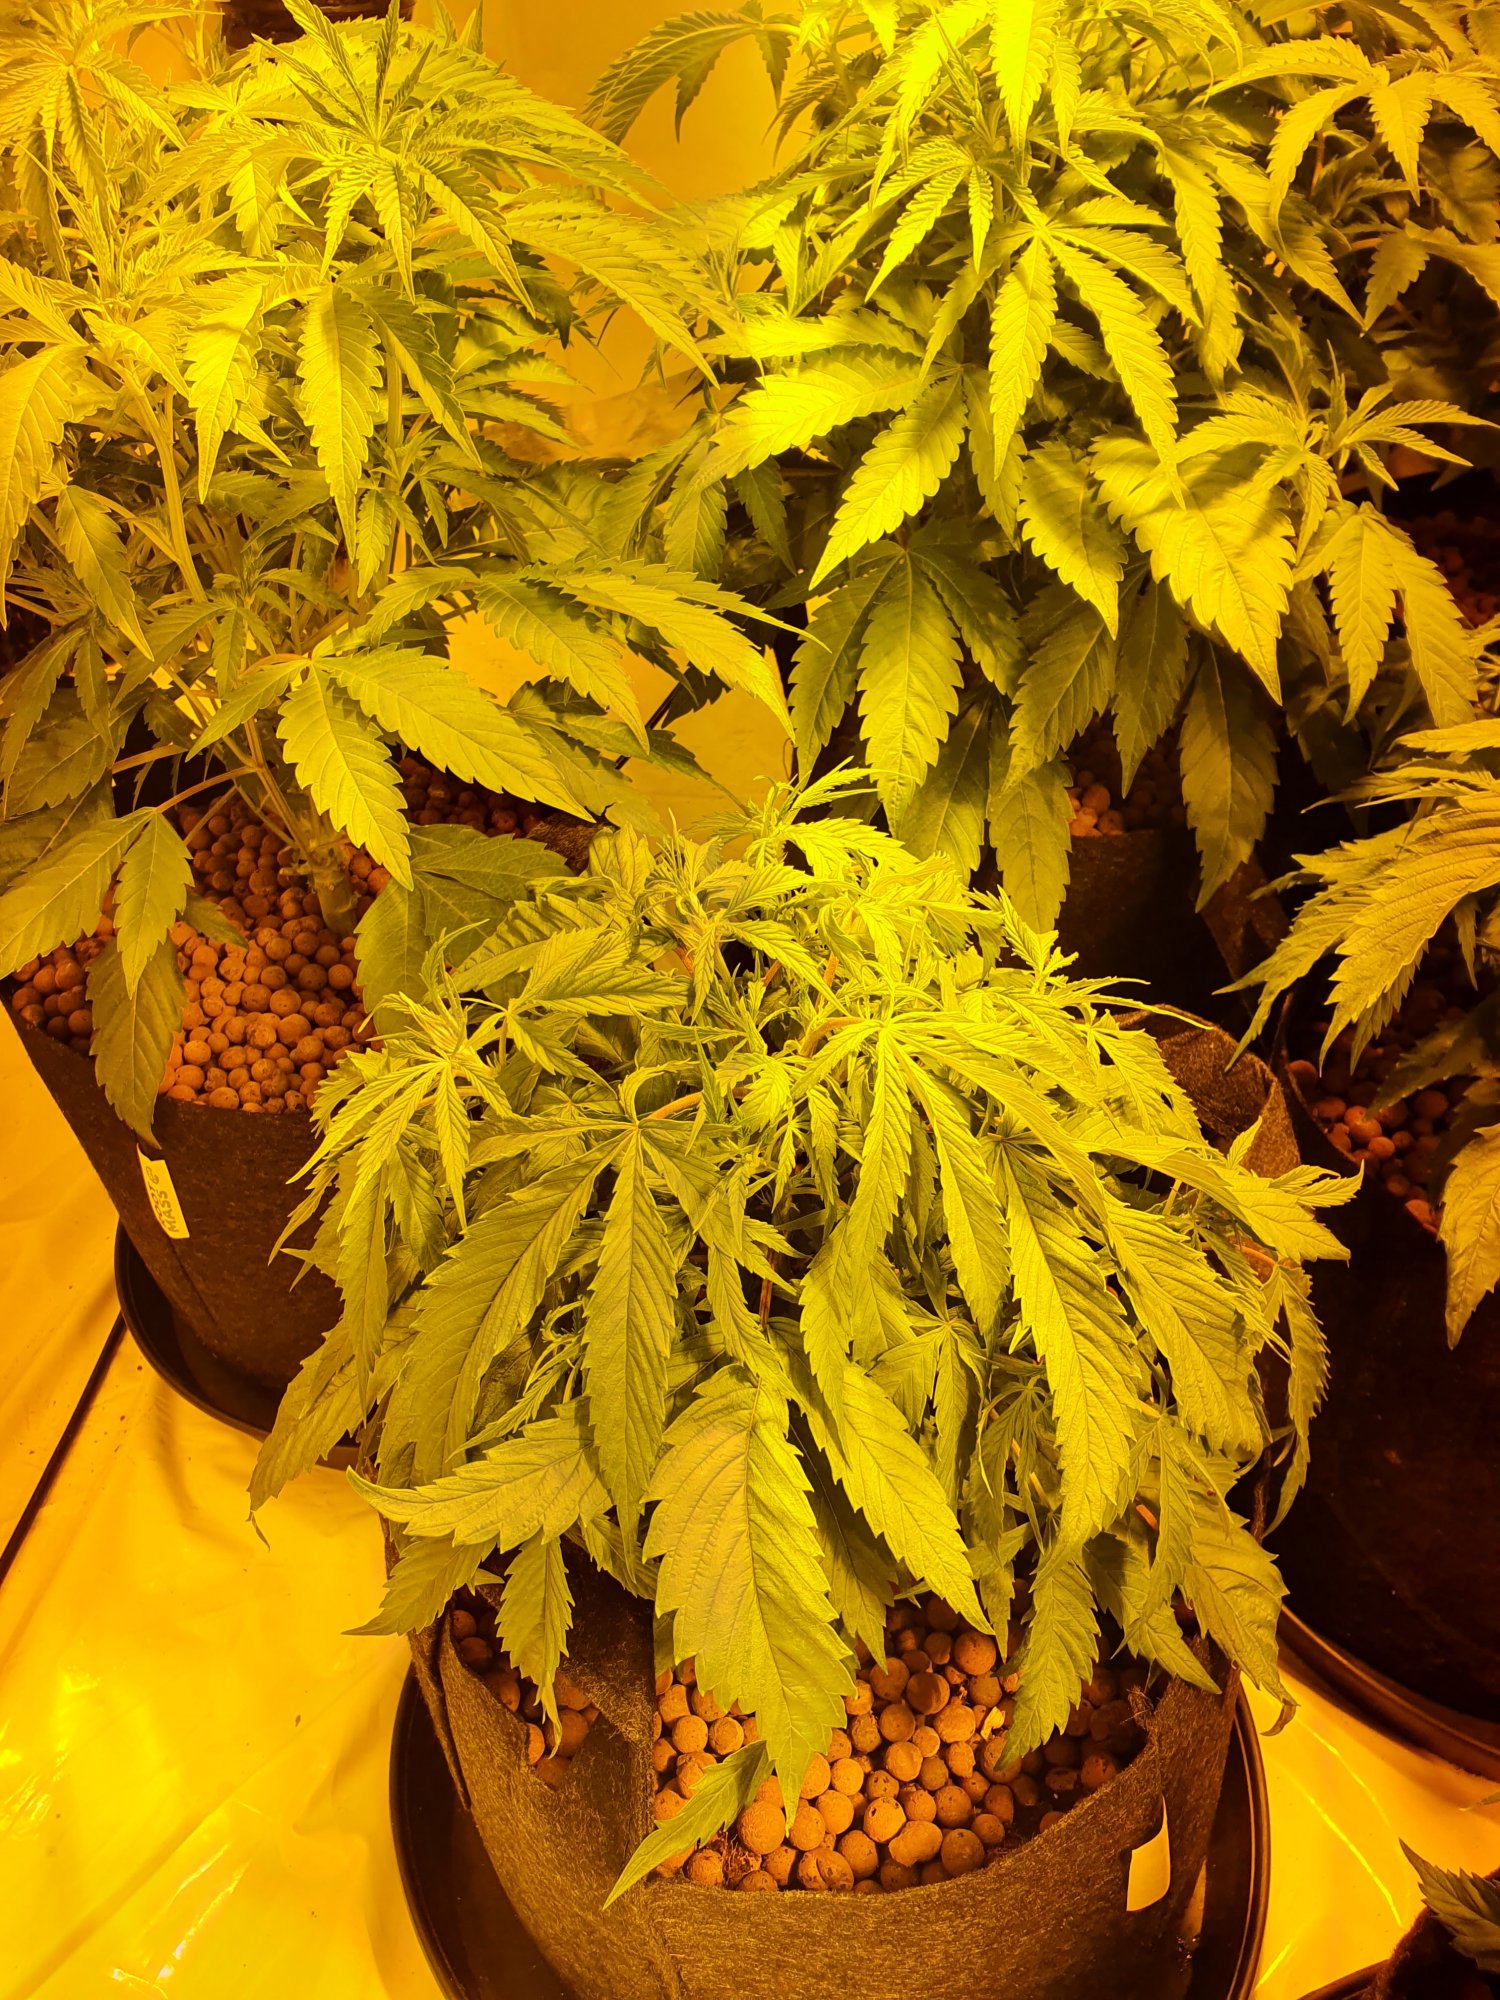 First time grower in coco